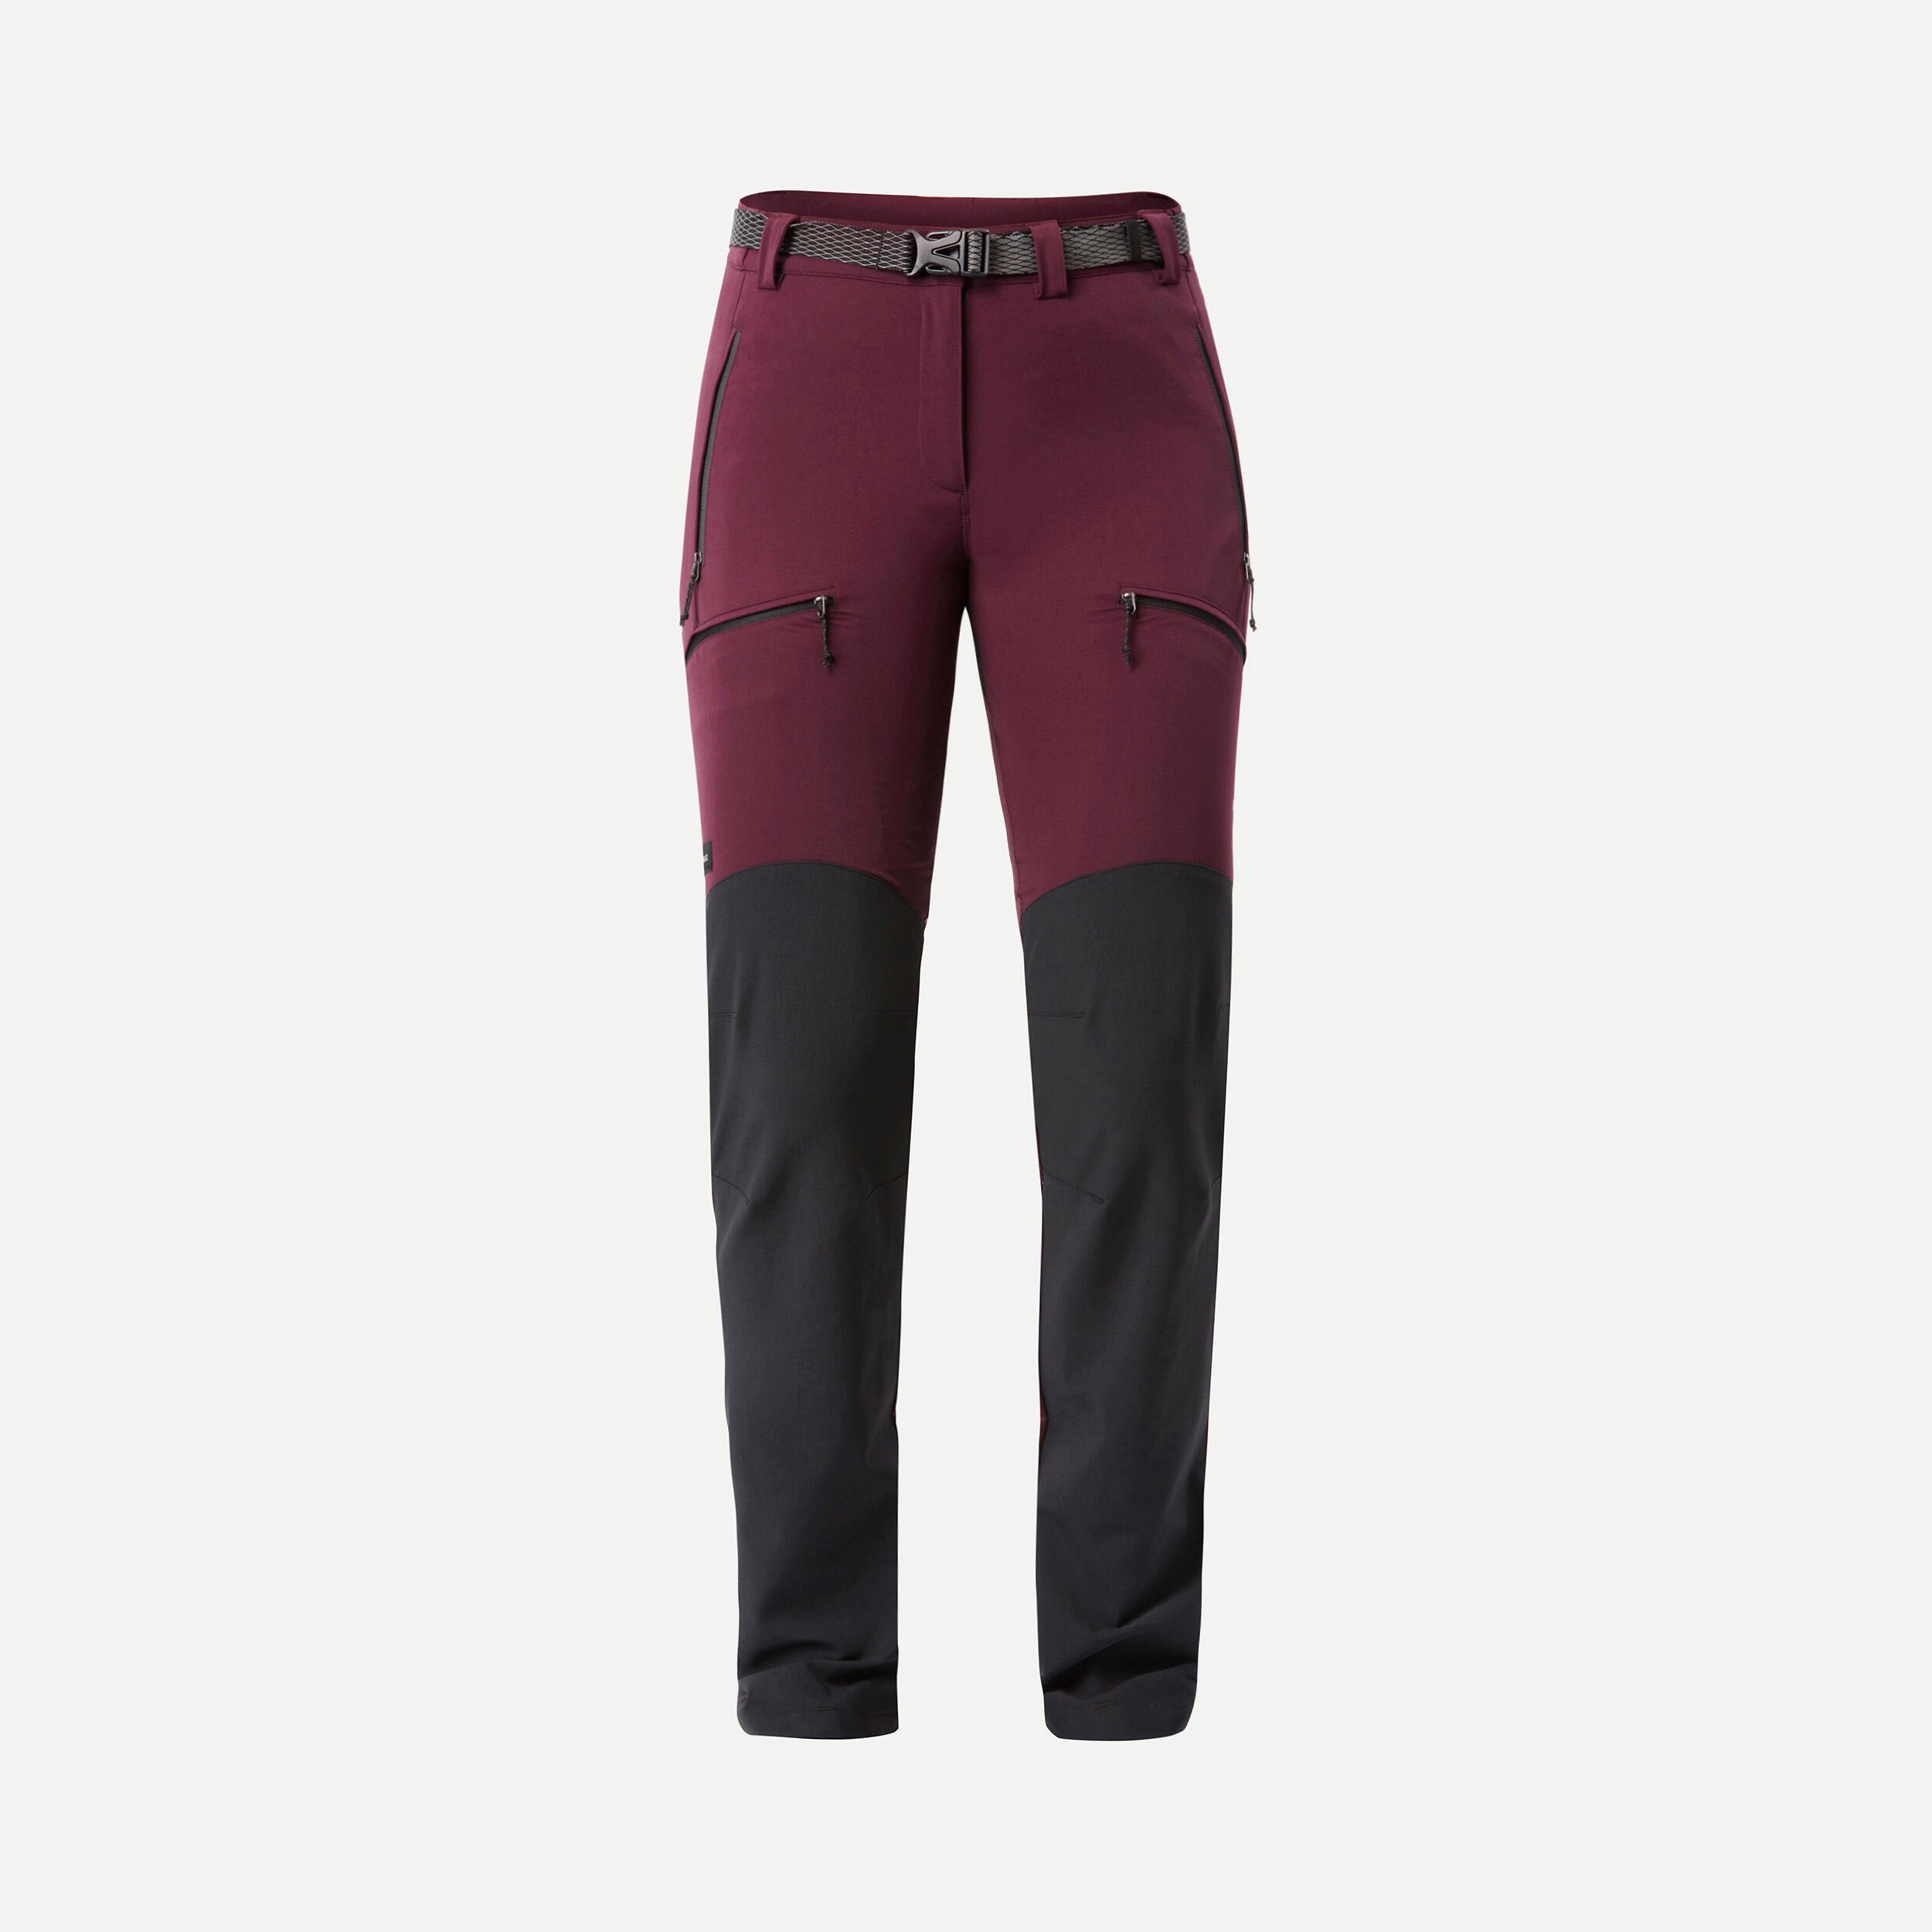 Xysaqa Men's Lightweight Hiking Travel Pants, Men Quick Dry Breathable  Athletic Fishing Active Joggers Pants Trousers with Zipper Pockets S-3XL  (with Belt) - Walmart.com